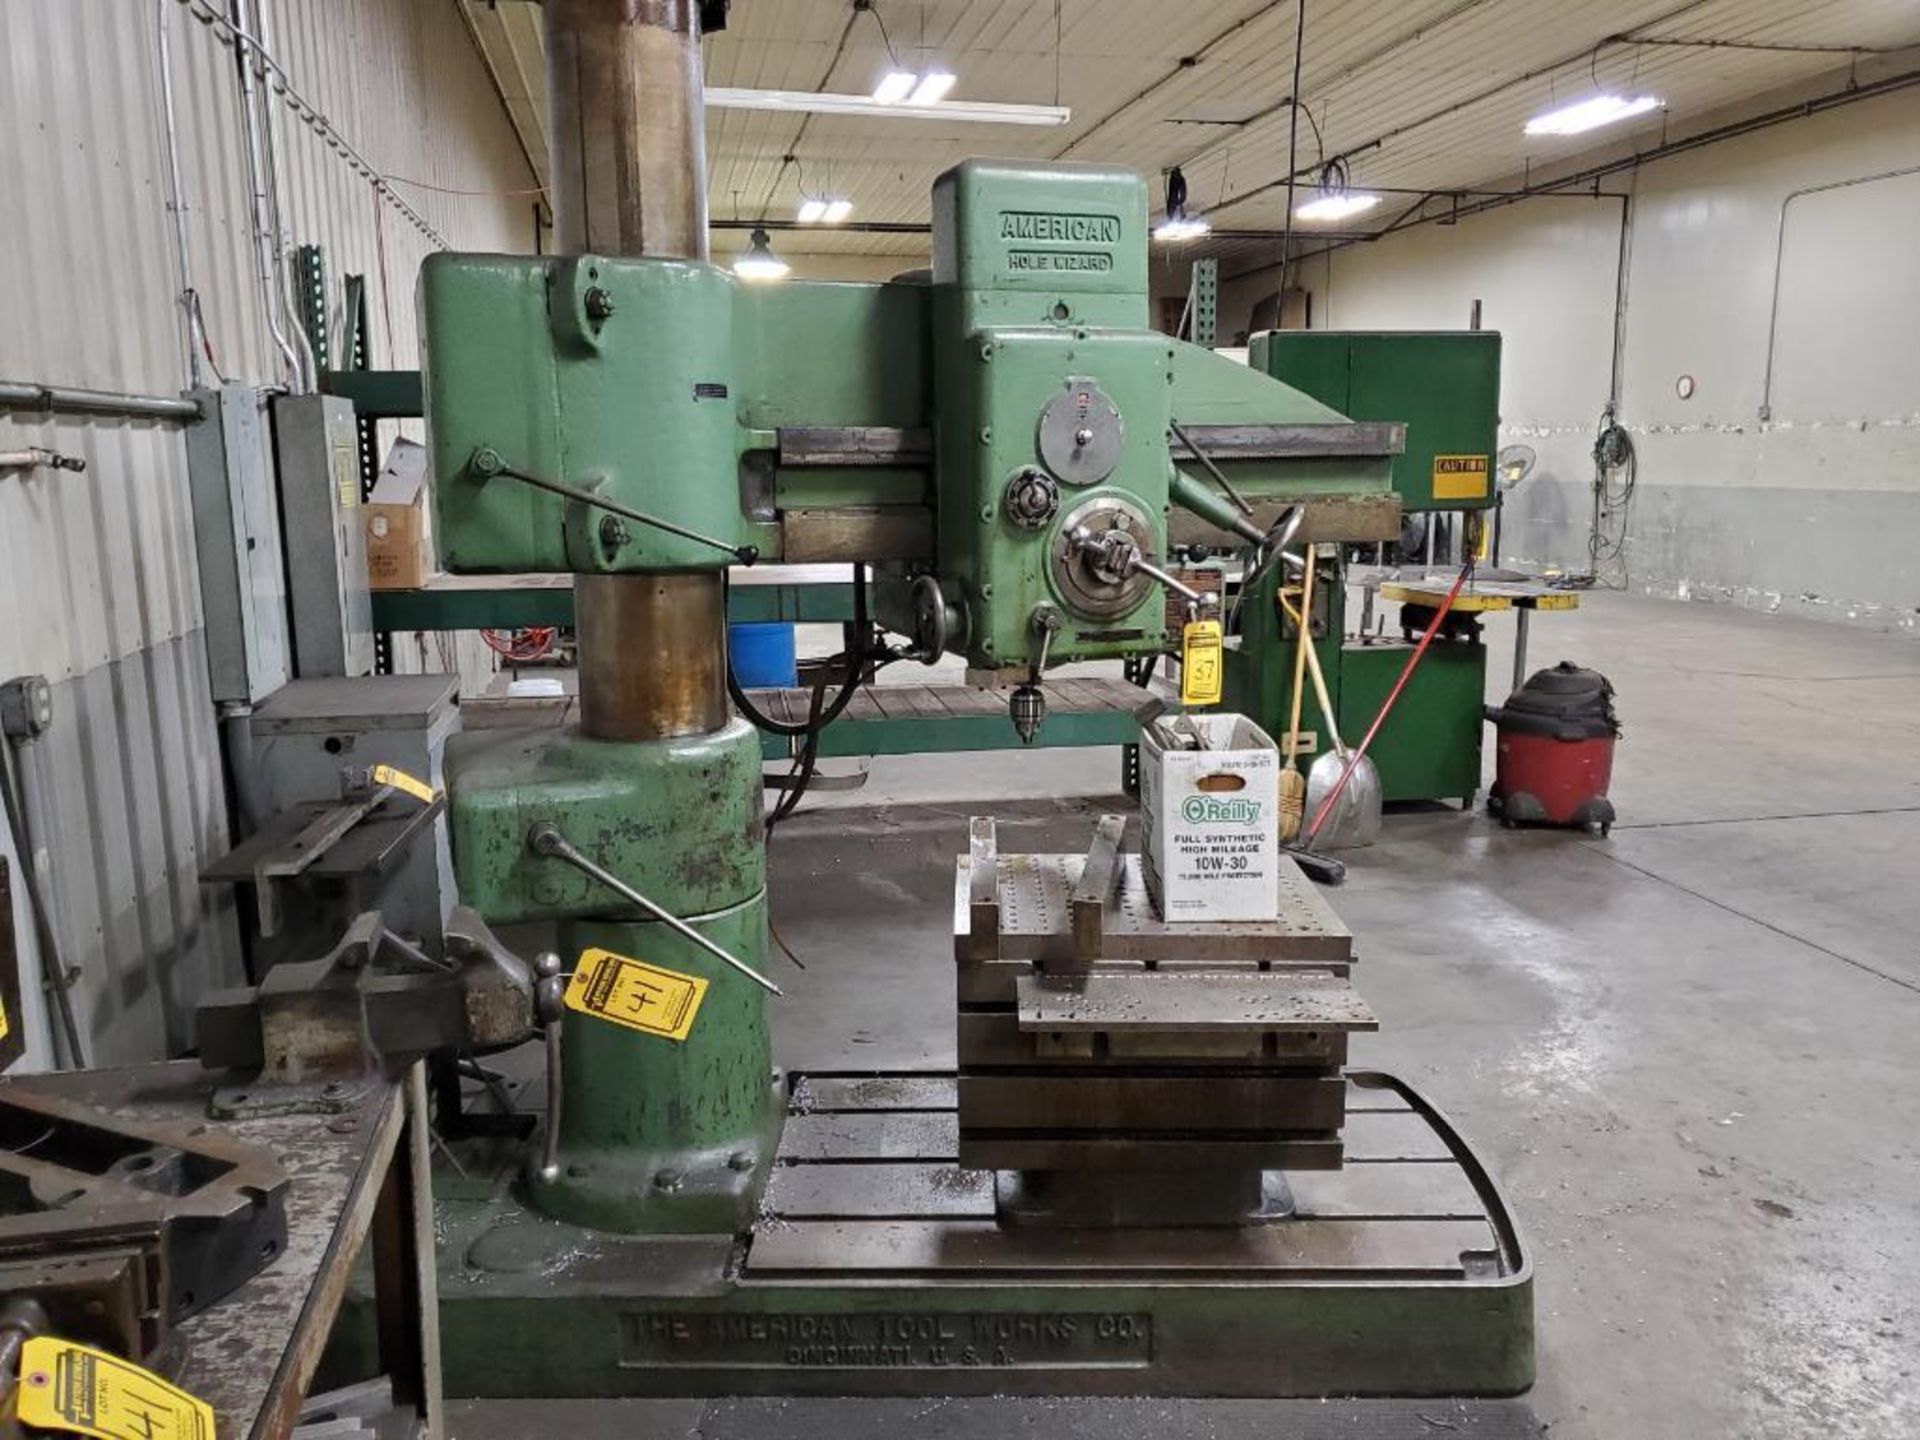 AMERICAN HOLE WIZARD RADIAL ARM DRILL, 4' ARM, 11'' COLUMN, 70-2100 SPINDLE RPM, 55'' X 36'' FOOT BE - Image 3 of 9